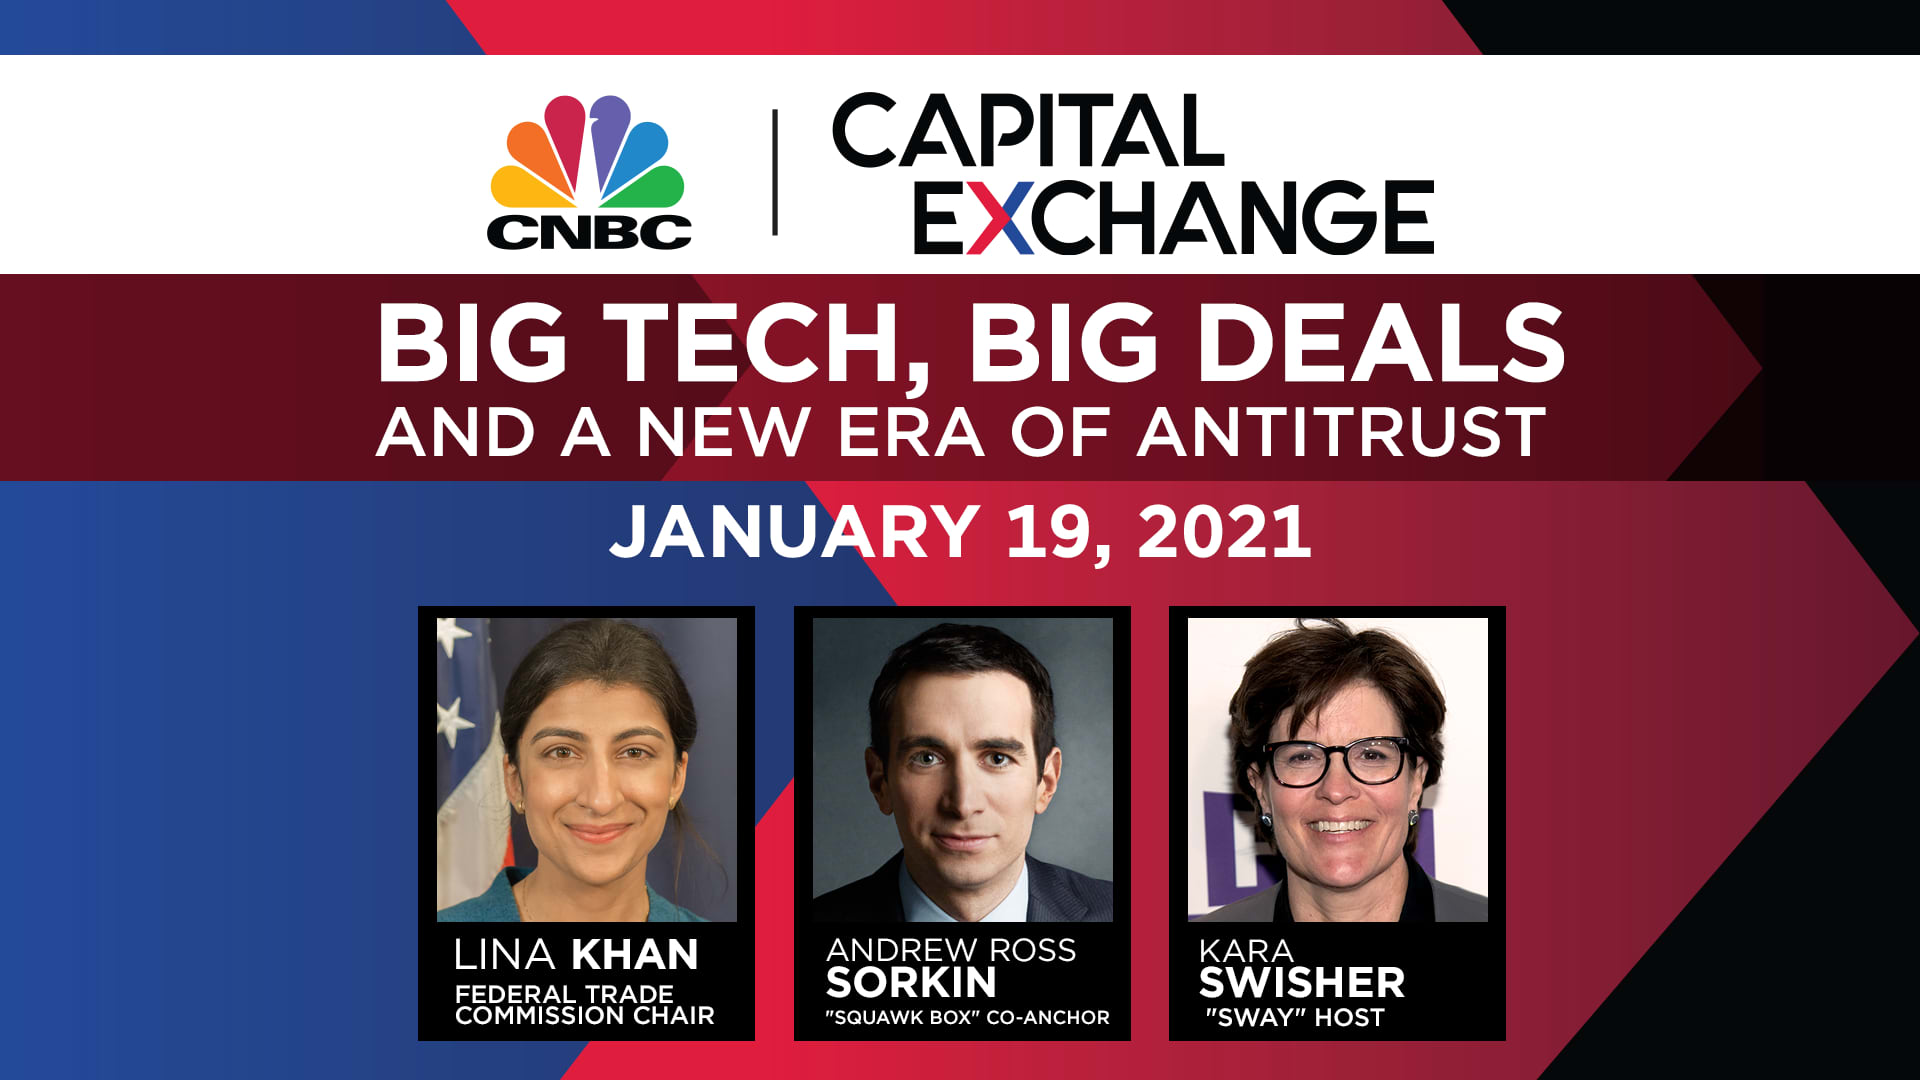 CNBC exclusive: Watch live as FTC Chair Lina Khan sits down with Andrew Ross Sorkin and Kara Swisher to discuss her plans to take on Big Tech